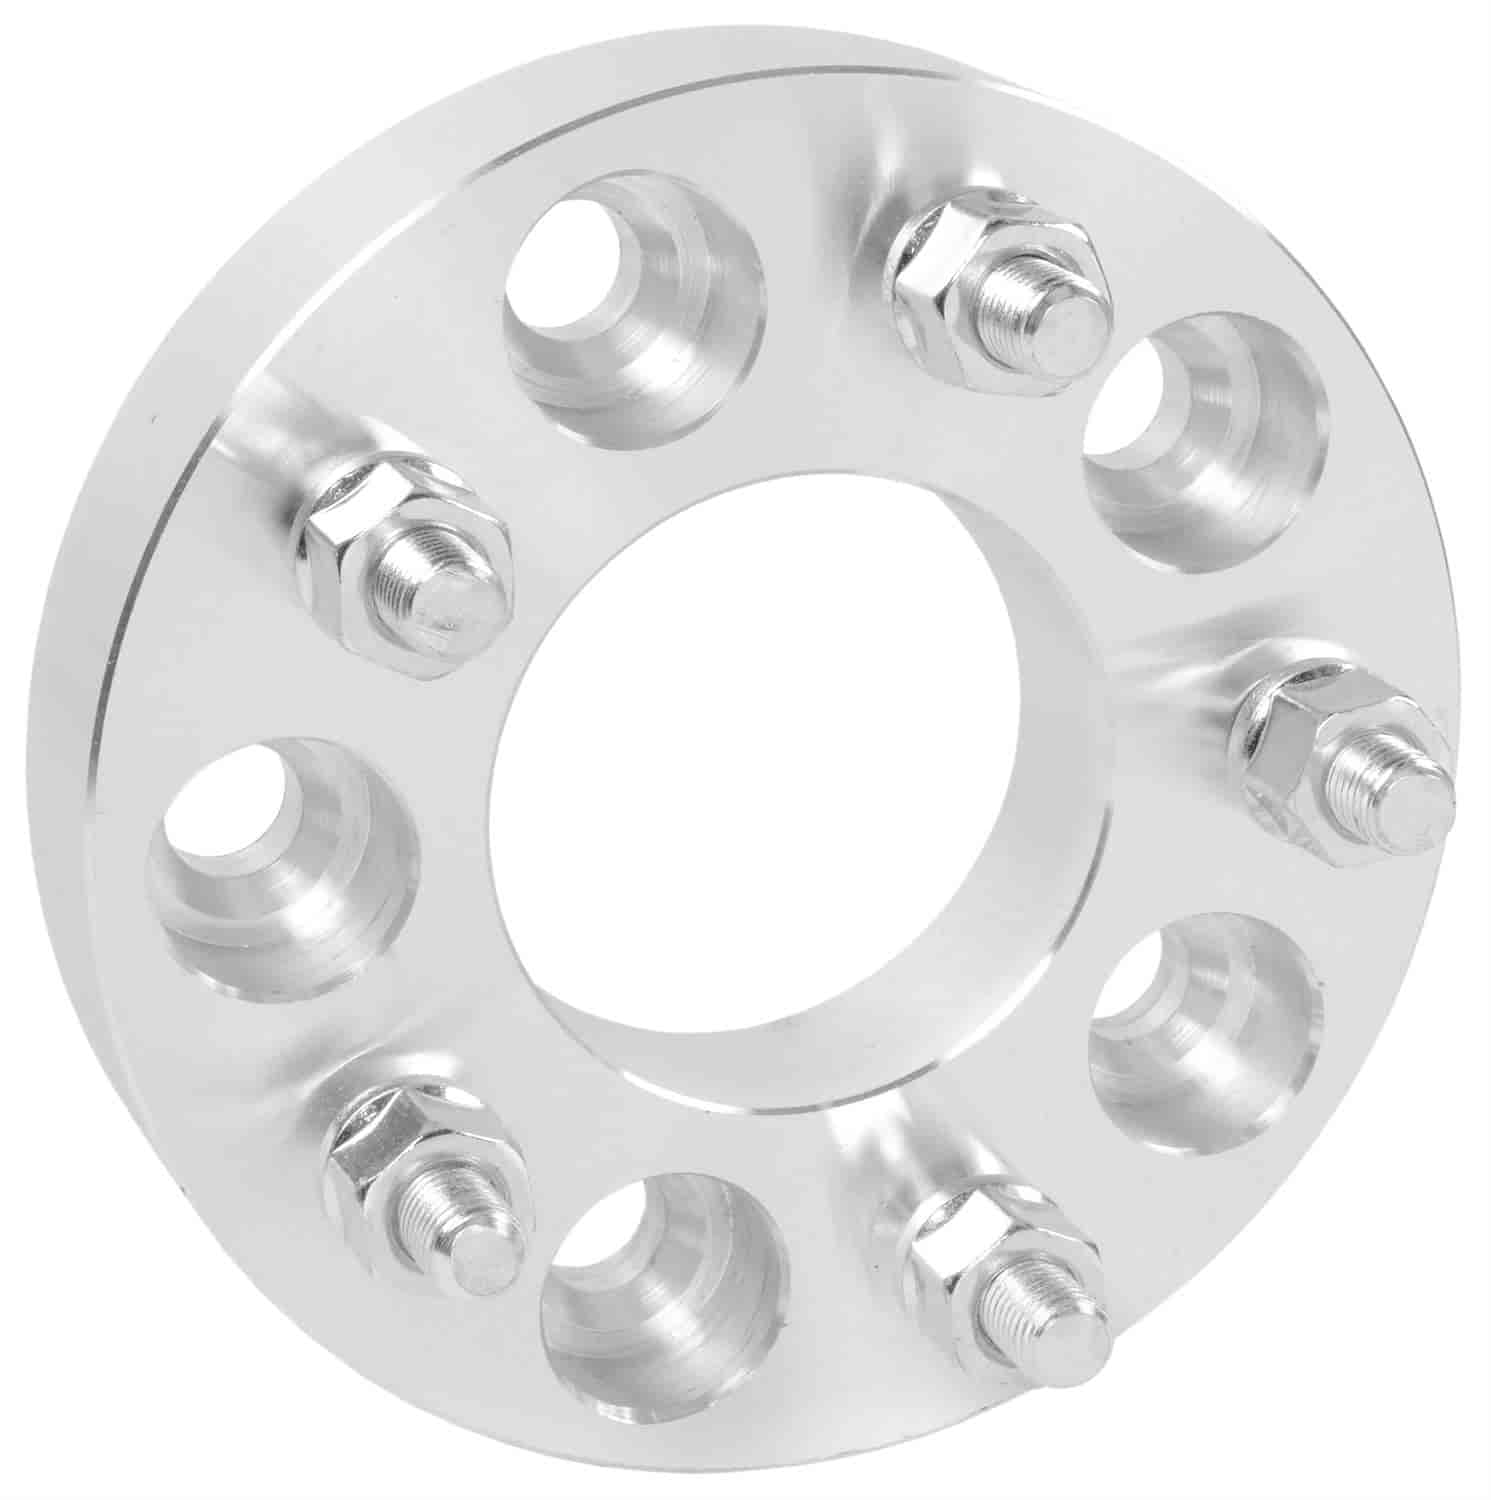 5-Lug Billet Aluminum Wheel Spacer [1.25 in. Thick] 5 x 4.75 in. Bolt Pattern